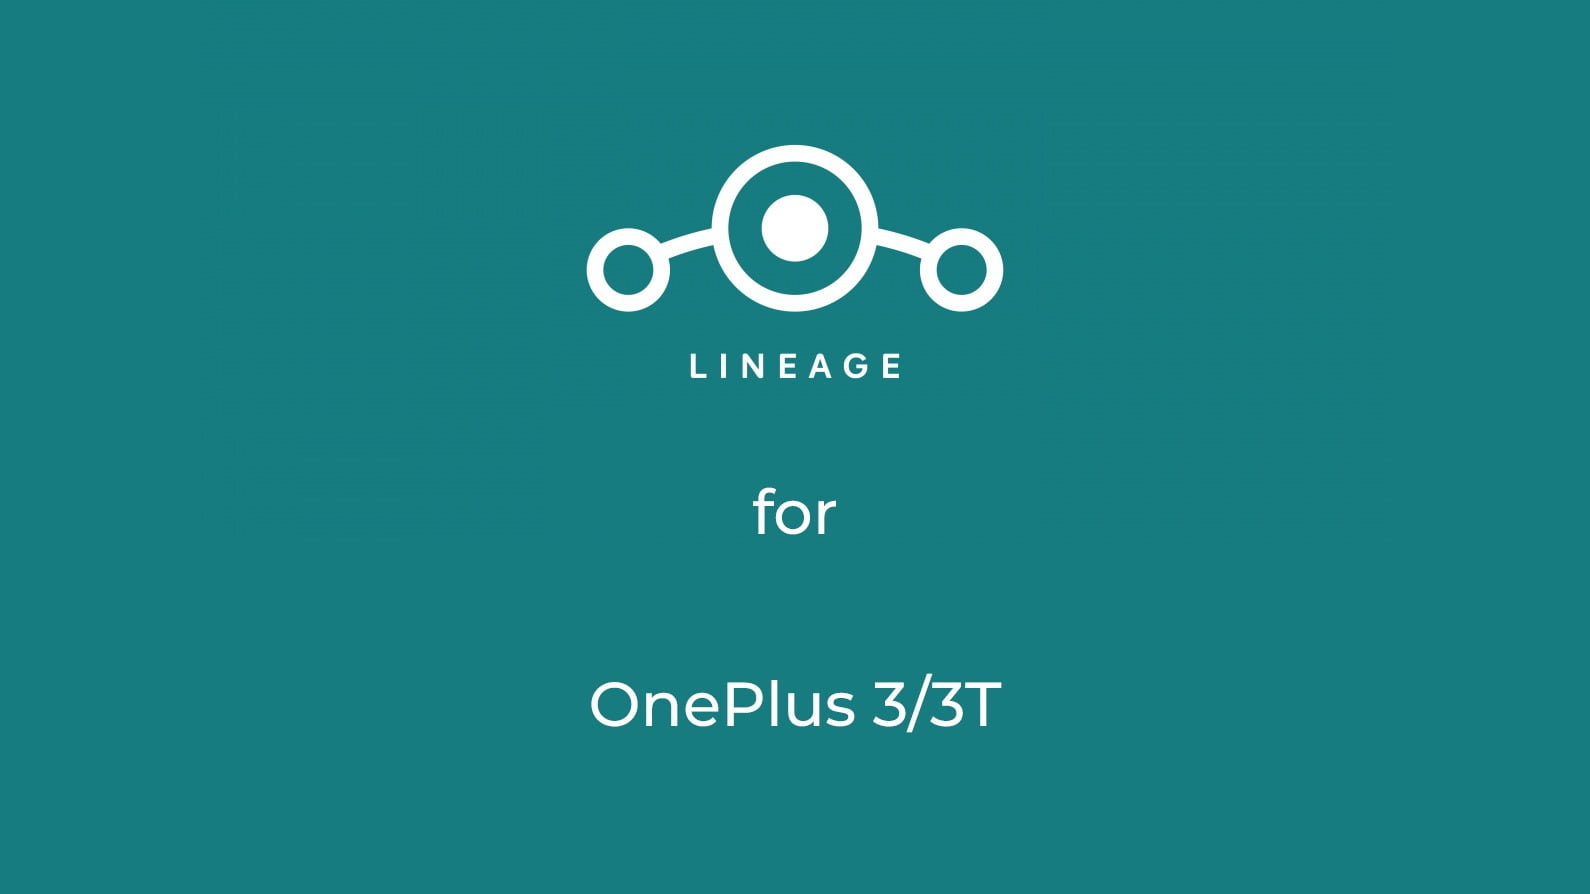 LineageOS 17.1 for Oneplus 3/3T